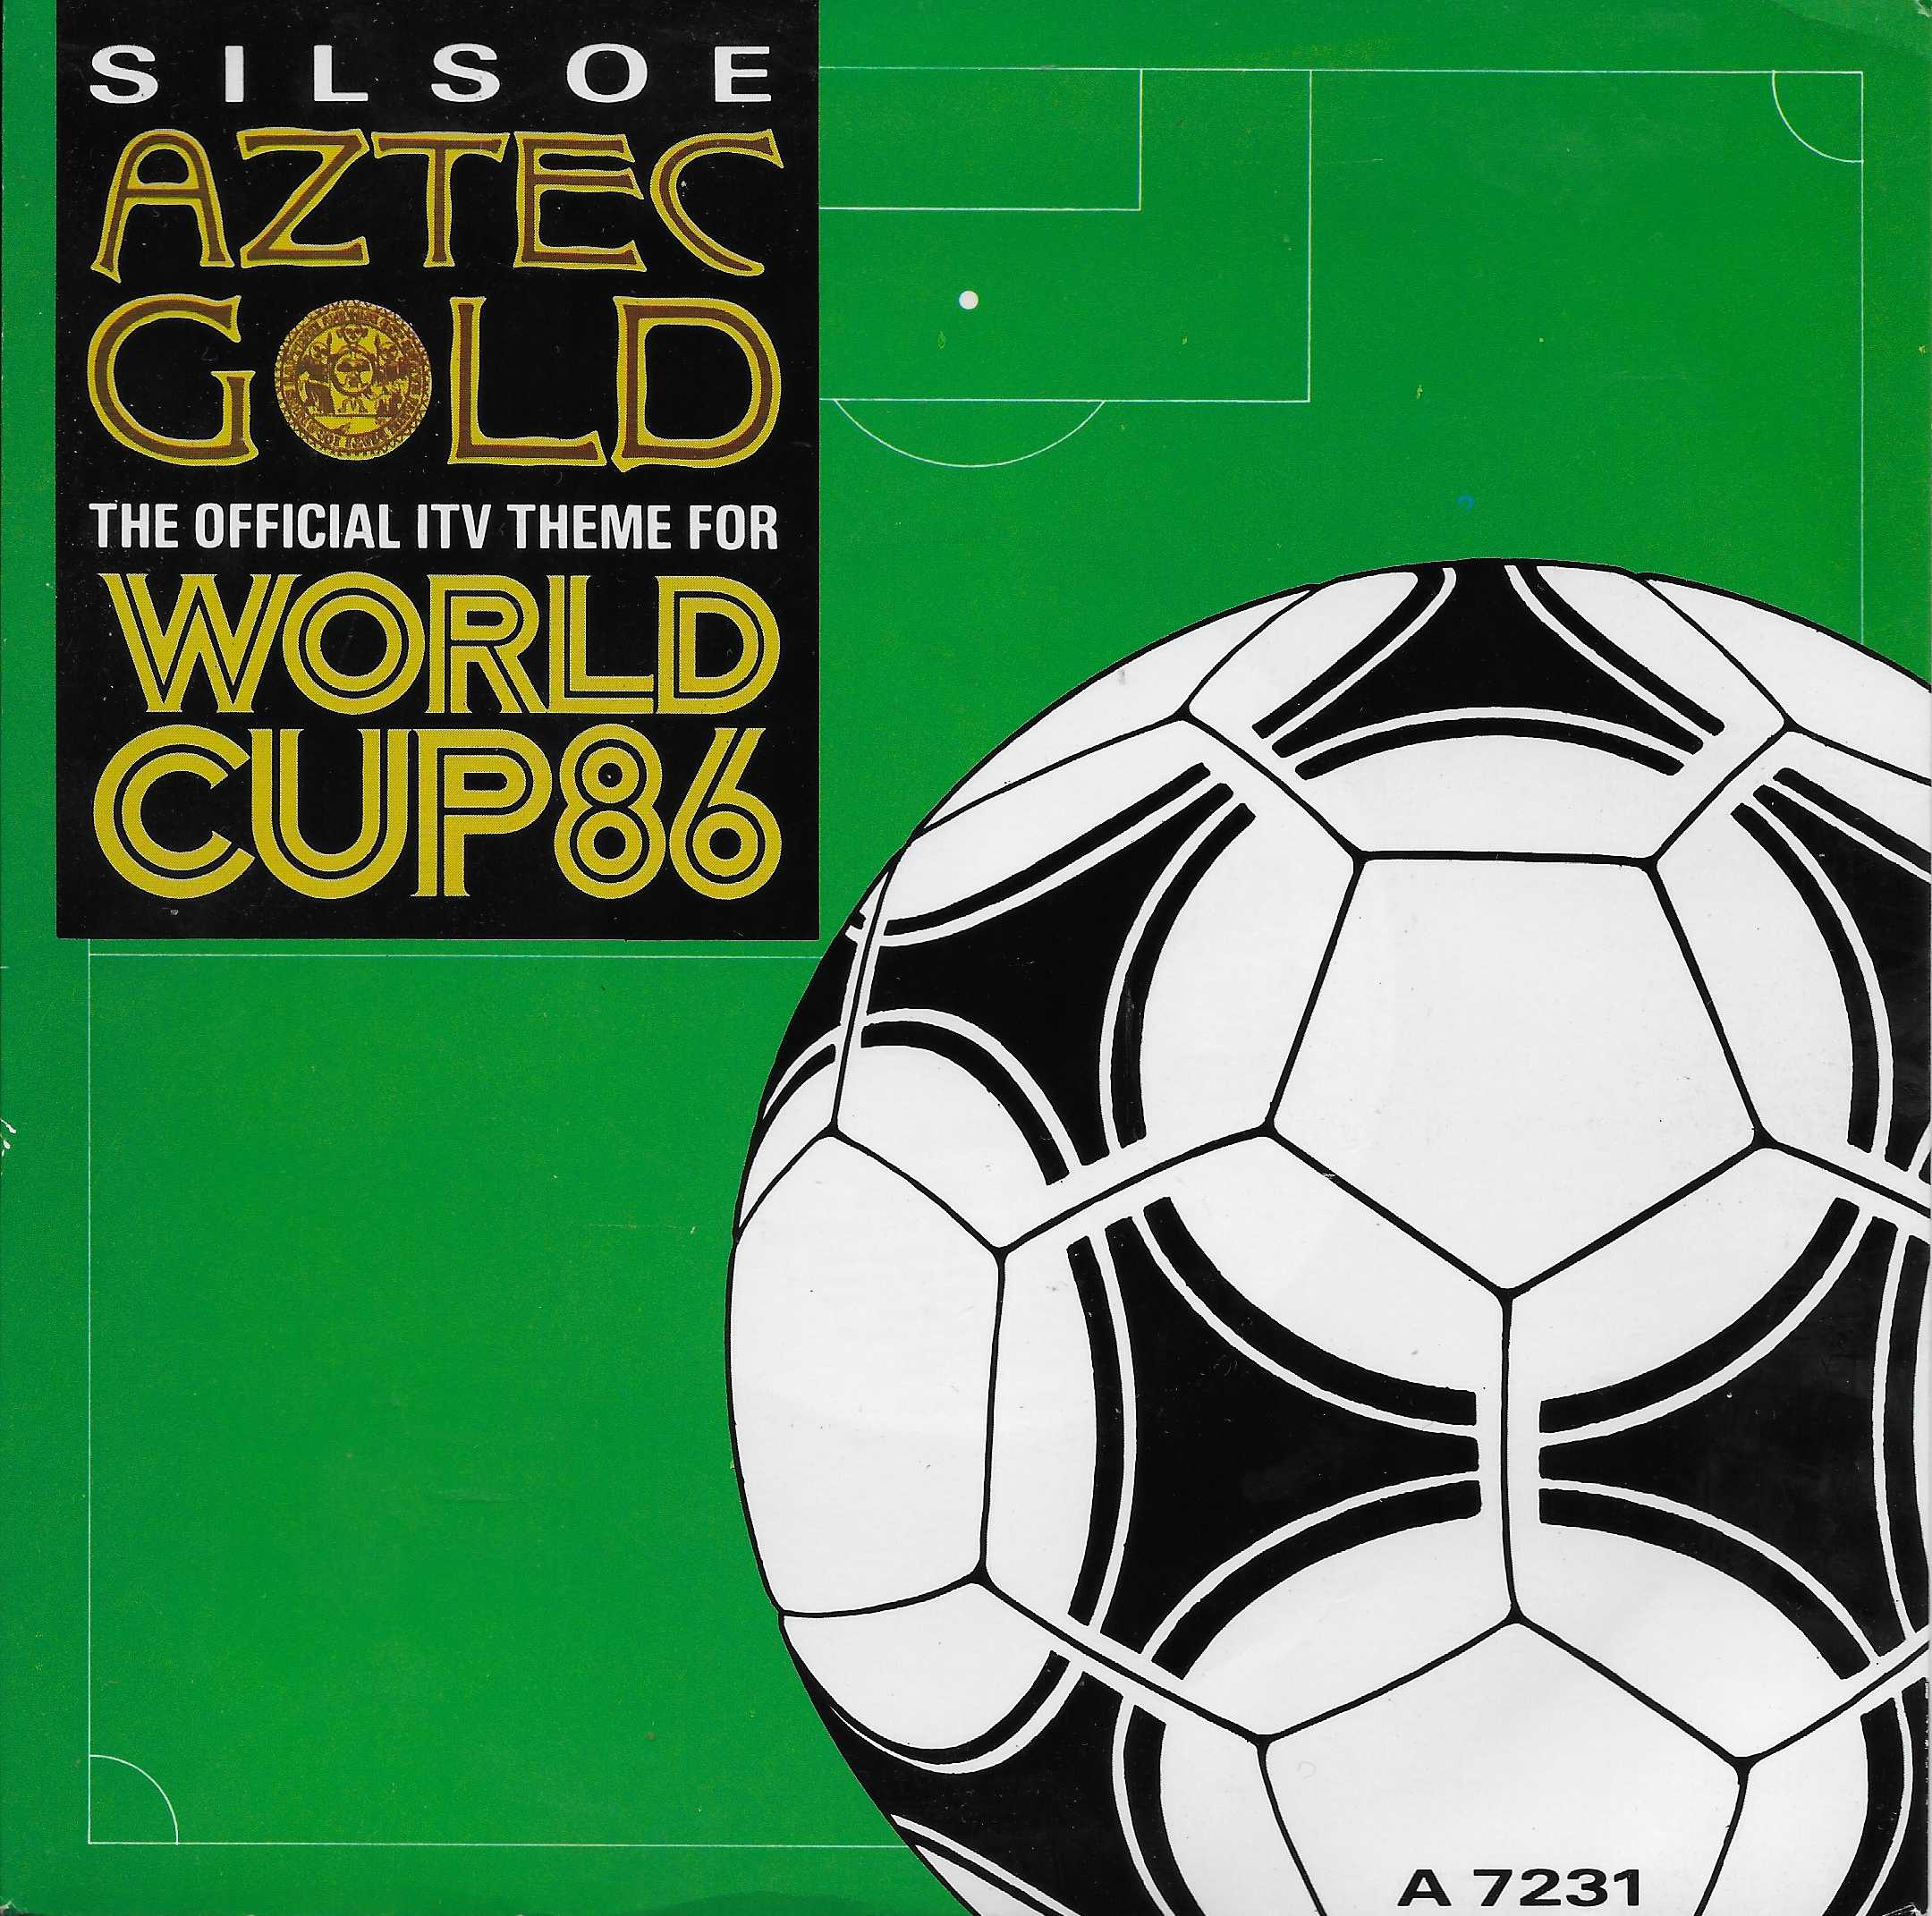 Picture of A 7231 Aztec gold (ITV World Cup theme (1986)) by artist R. Argent / P. Van Hooke from ITV, Channel 4 and Channel 5 library